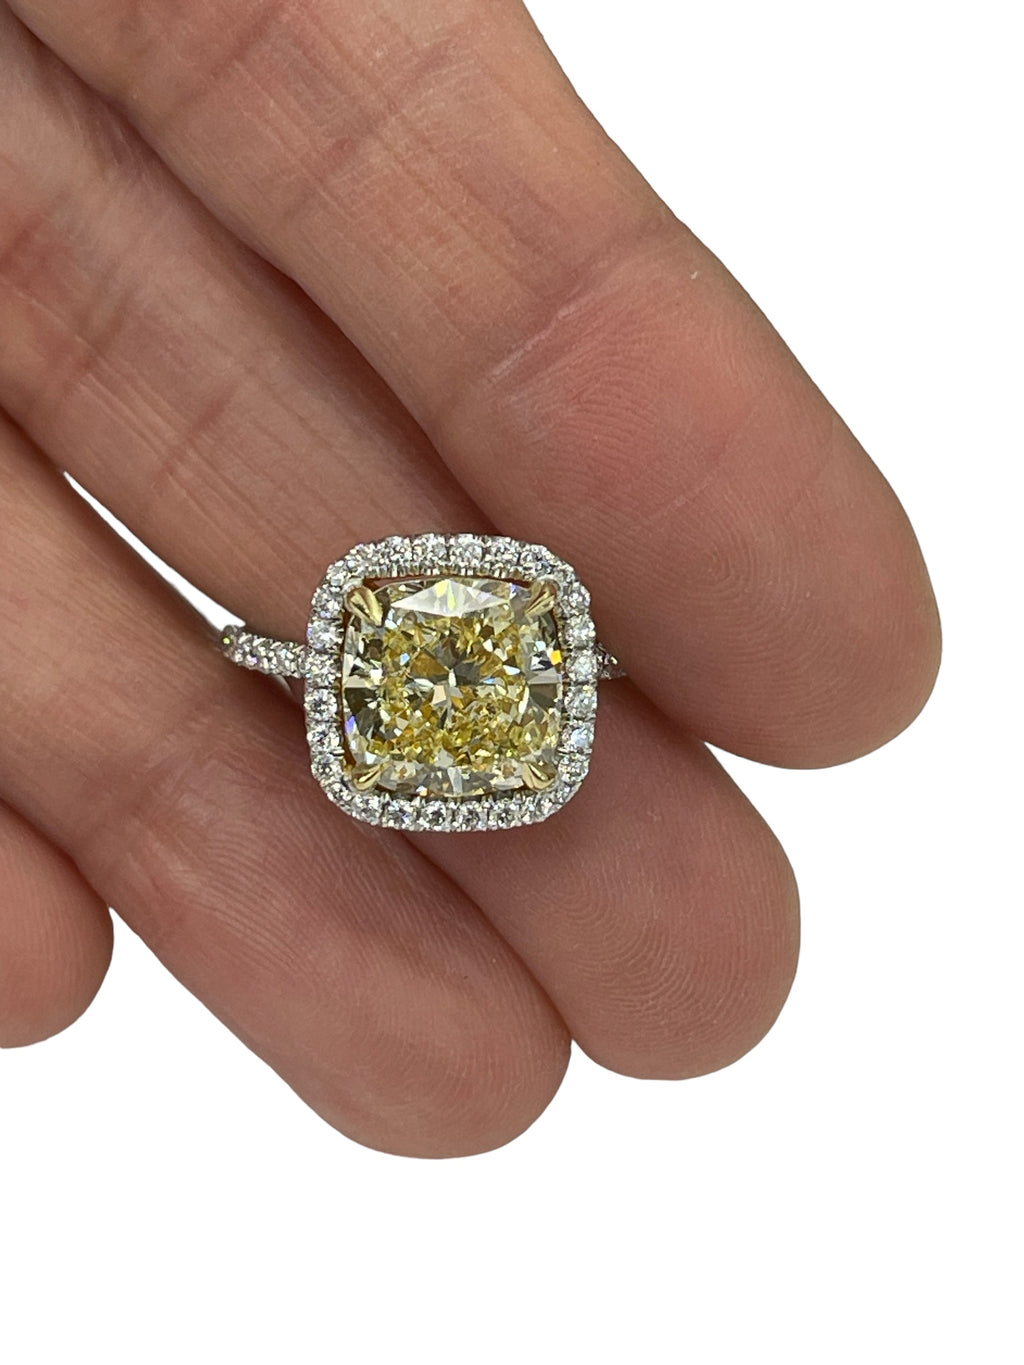 Two Carat Diamond Engagement Rings: The NZ Buying Guide | Four Words